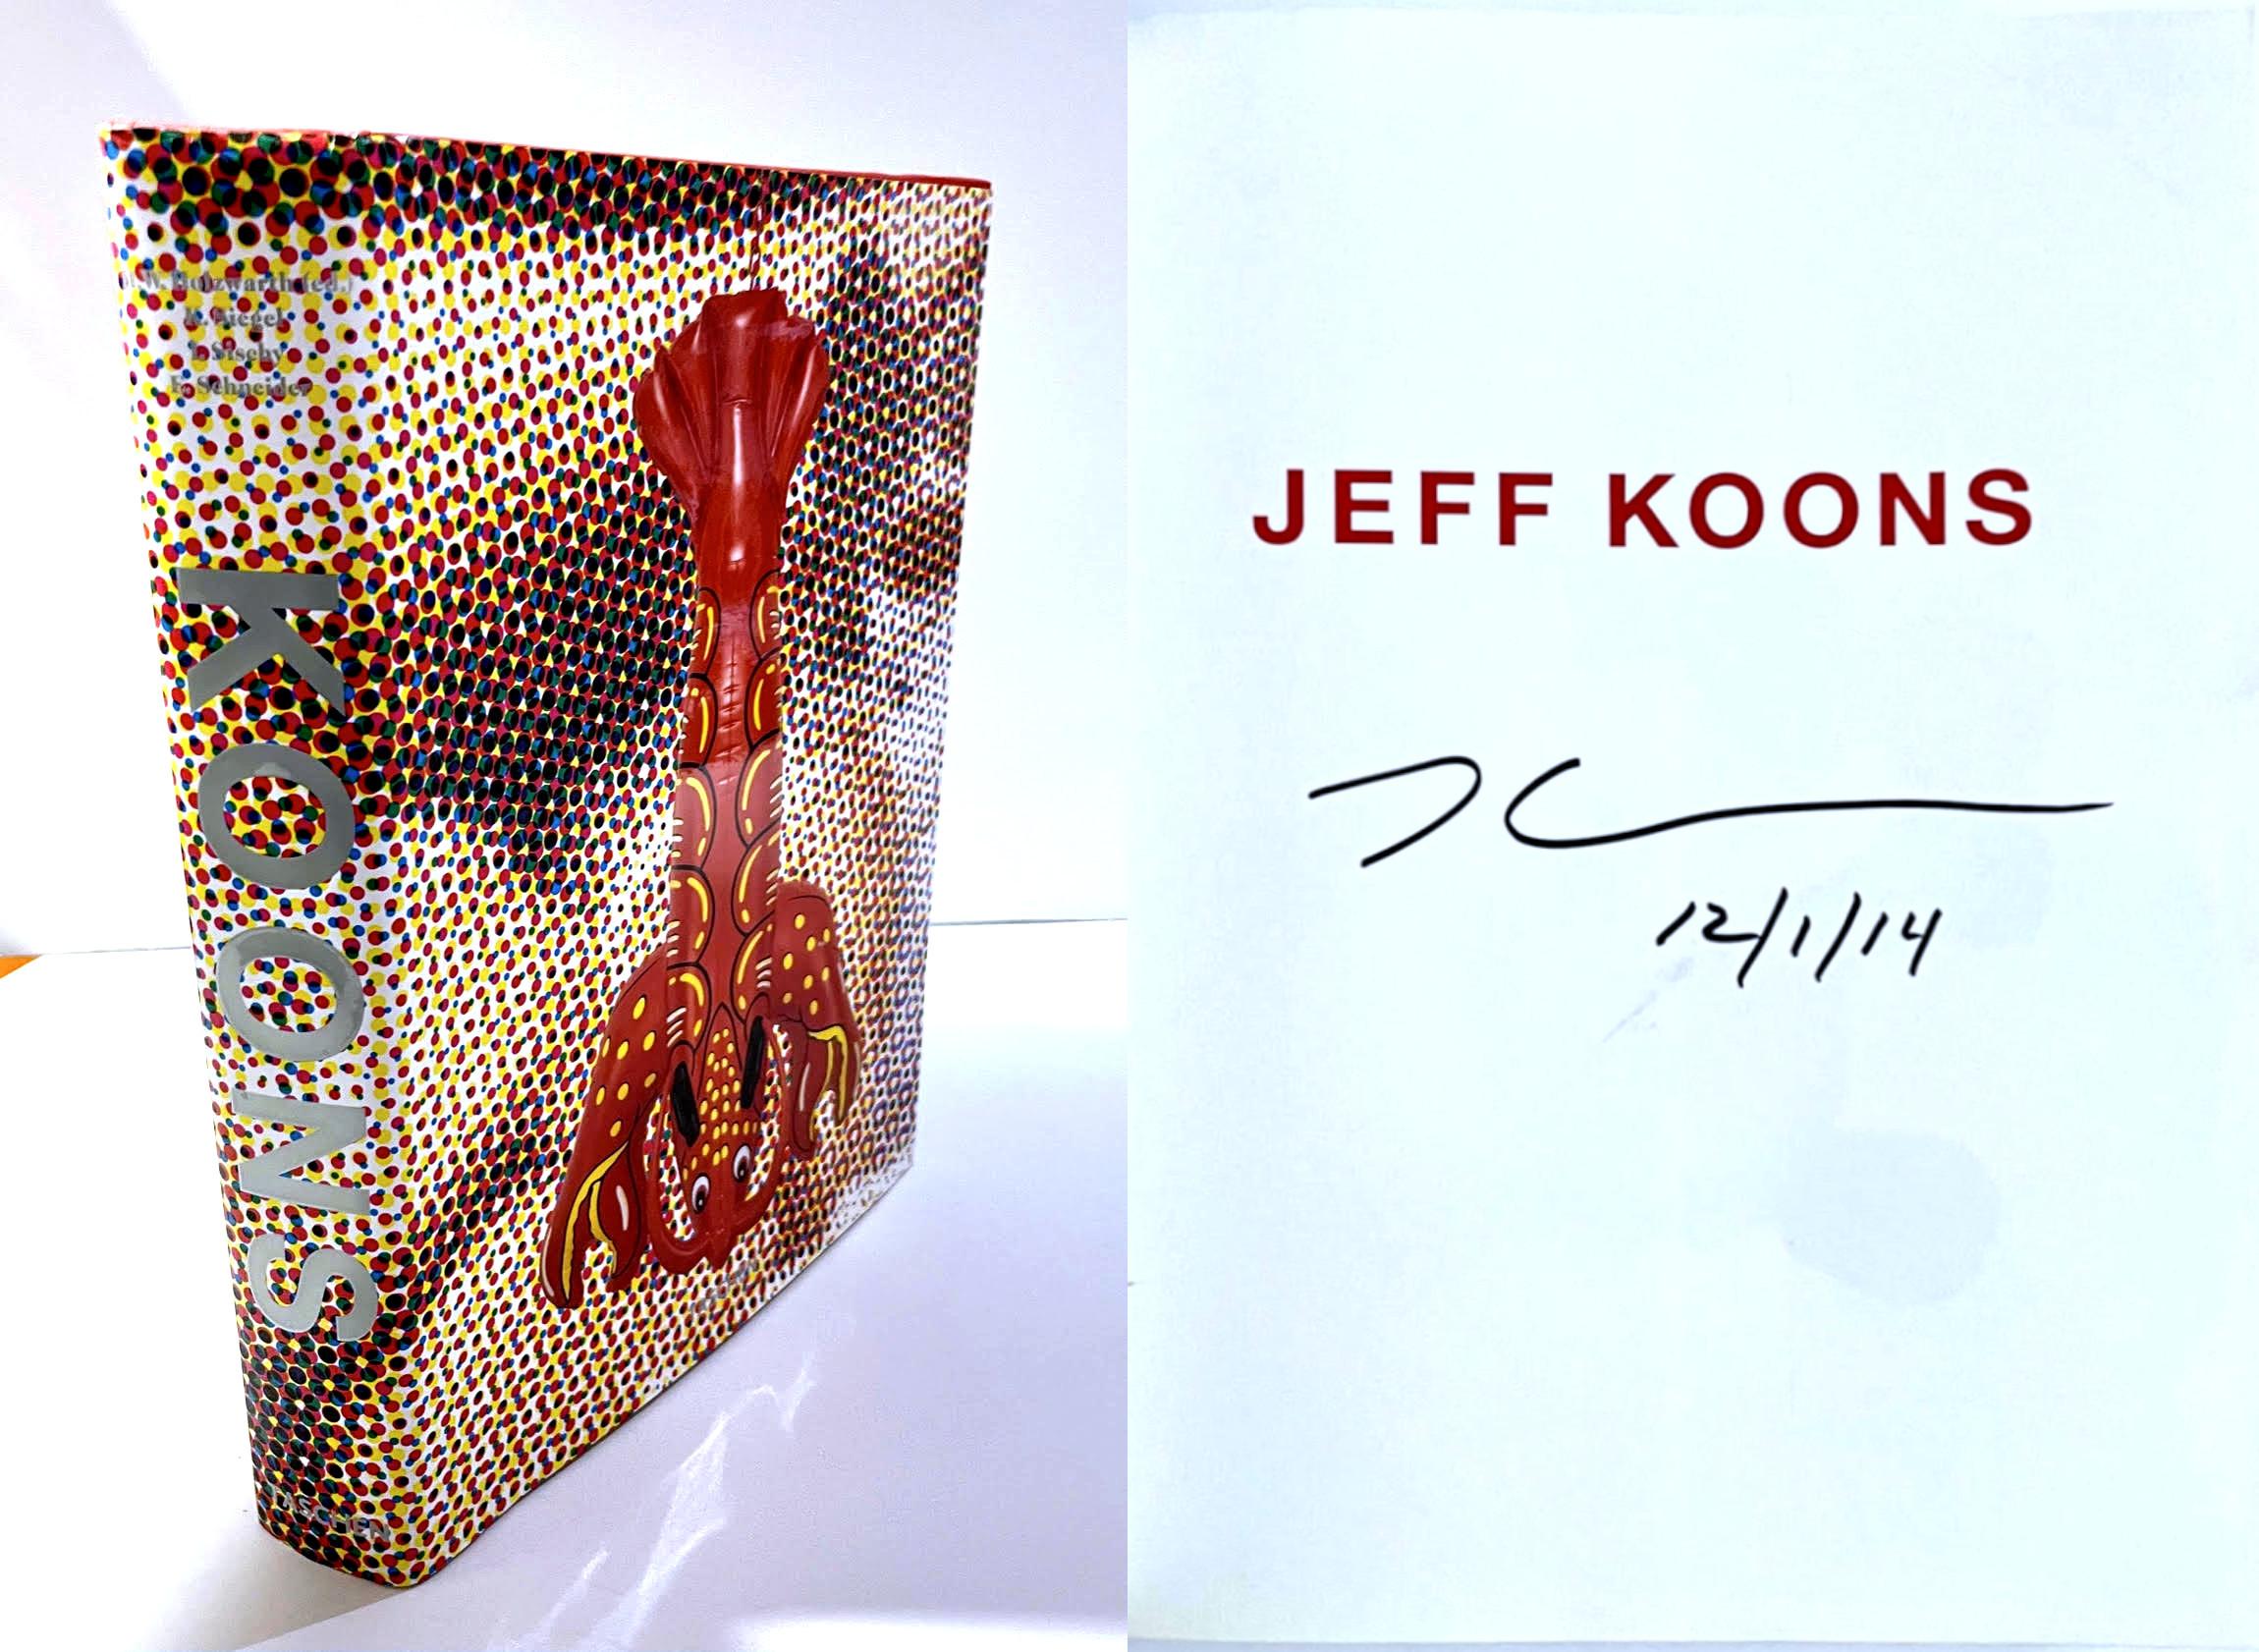 Jeff Koons
Lavishly illustrated 592 page monograph (hand signed by Jeff Koons), 2009
Hardback monograph with dust jacket (hand signed by Jeff Koons)
Boldly signed and dated 12/1/14 on the half title page
13 1/2 × 10 × 2 inches

Boldly signed and